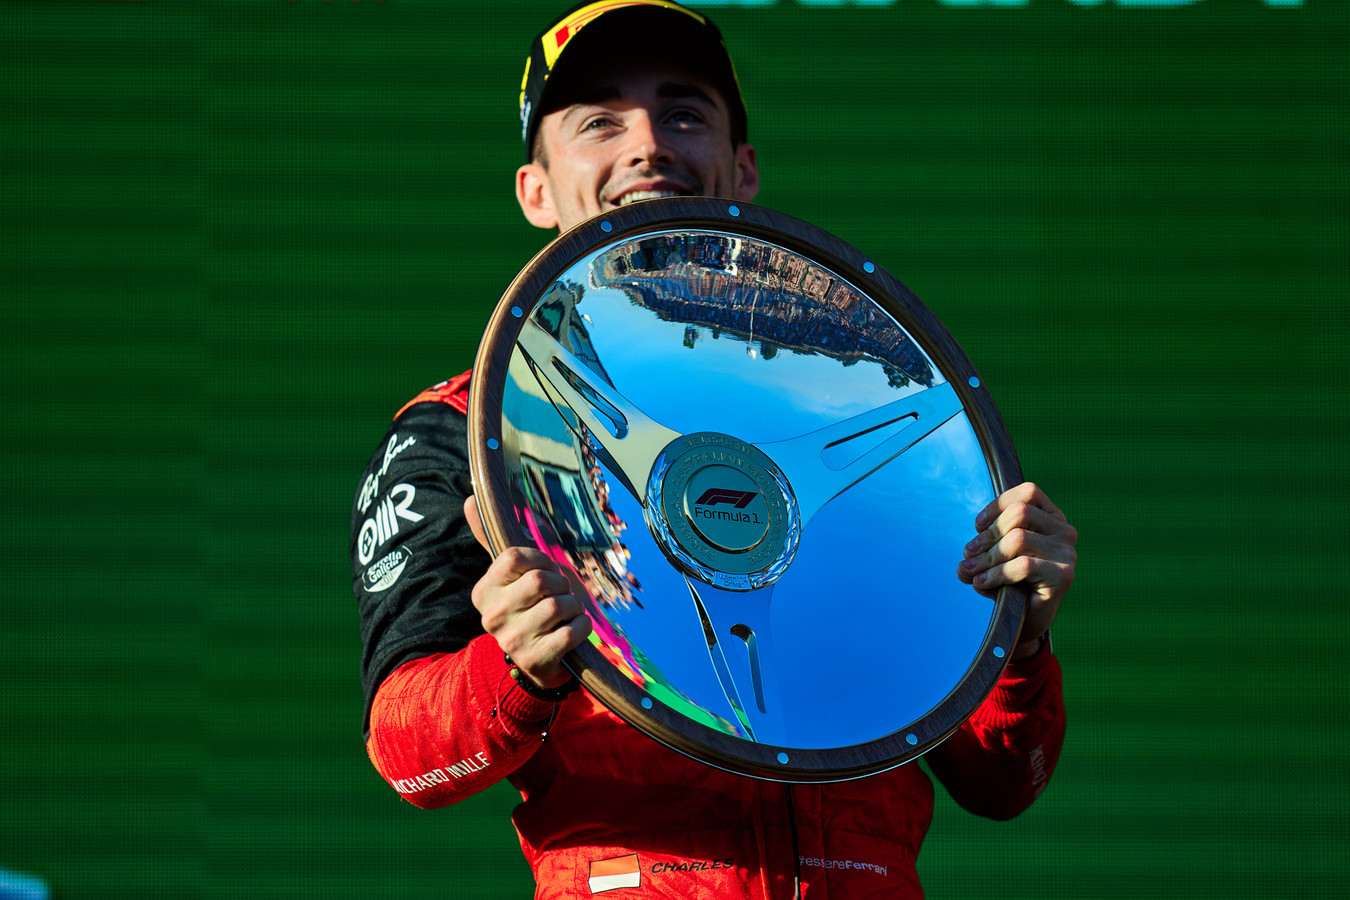 Leclerc adds another prize to his building trophy collection. (Photo: Scuderia Ferrari)